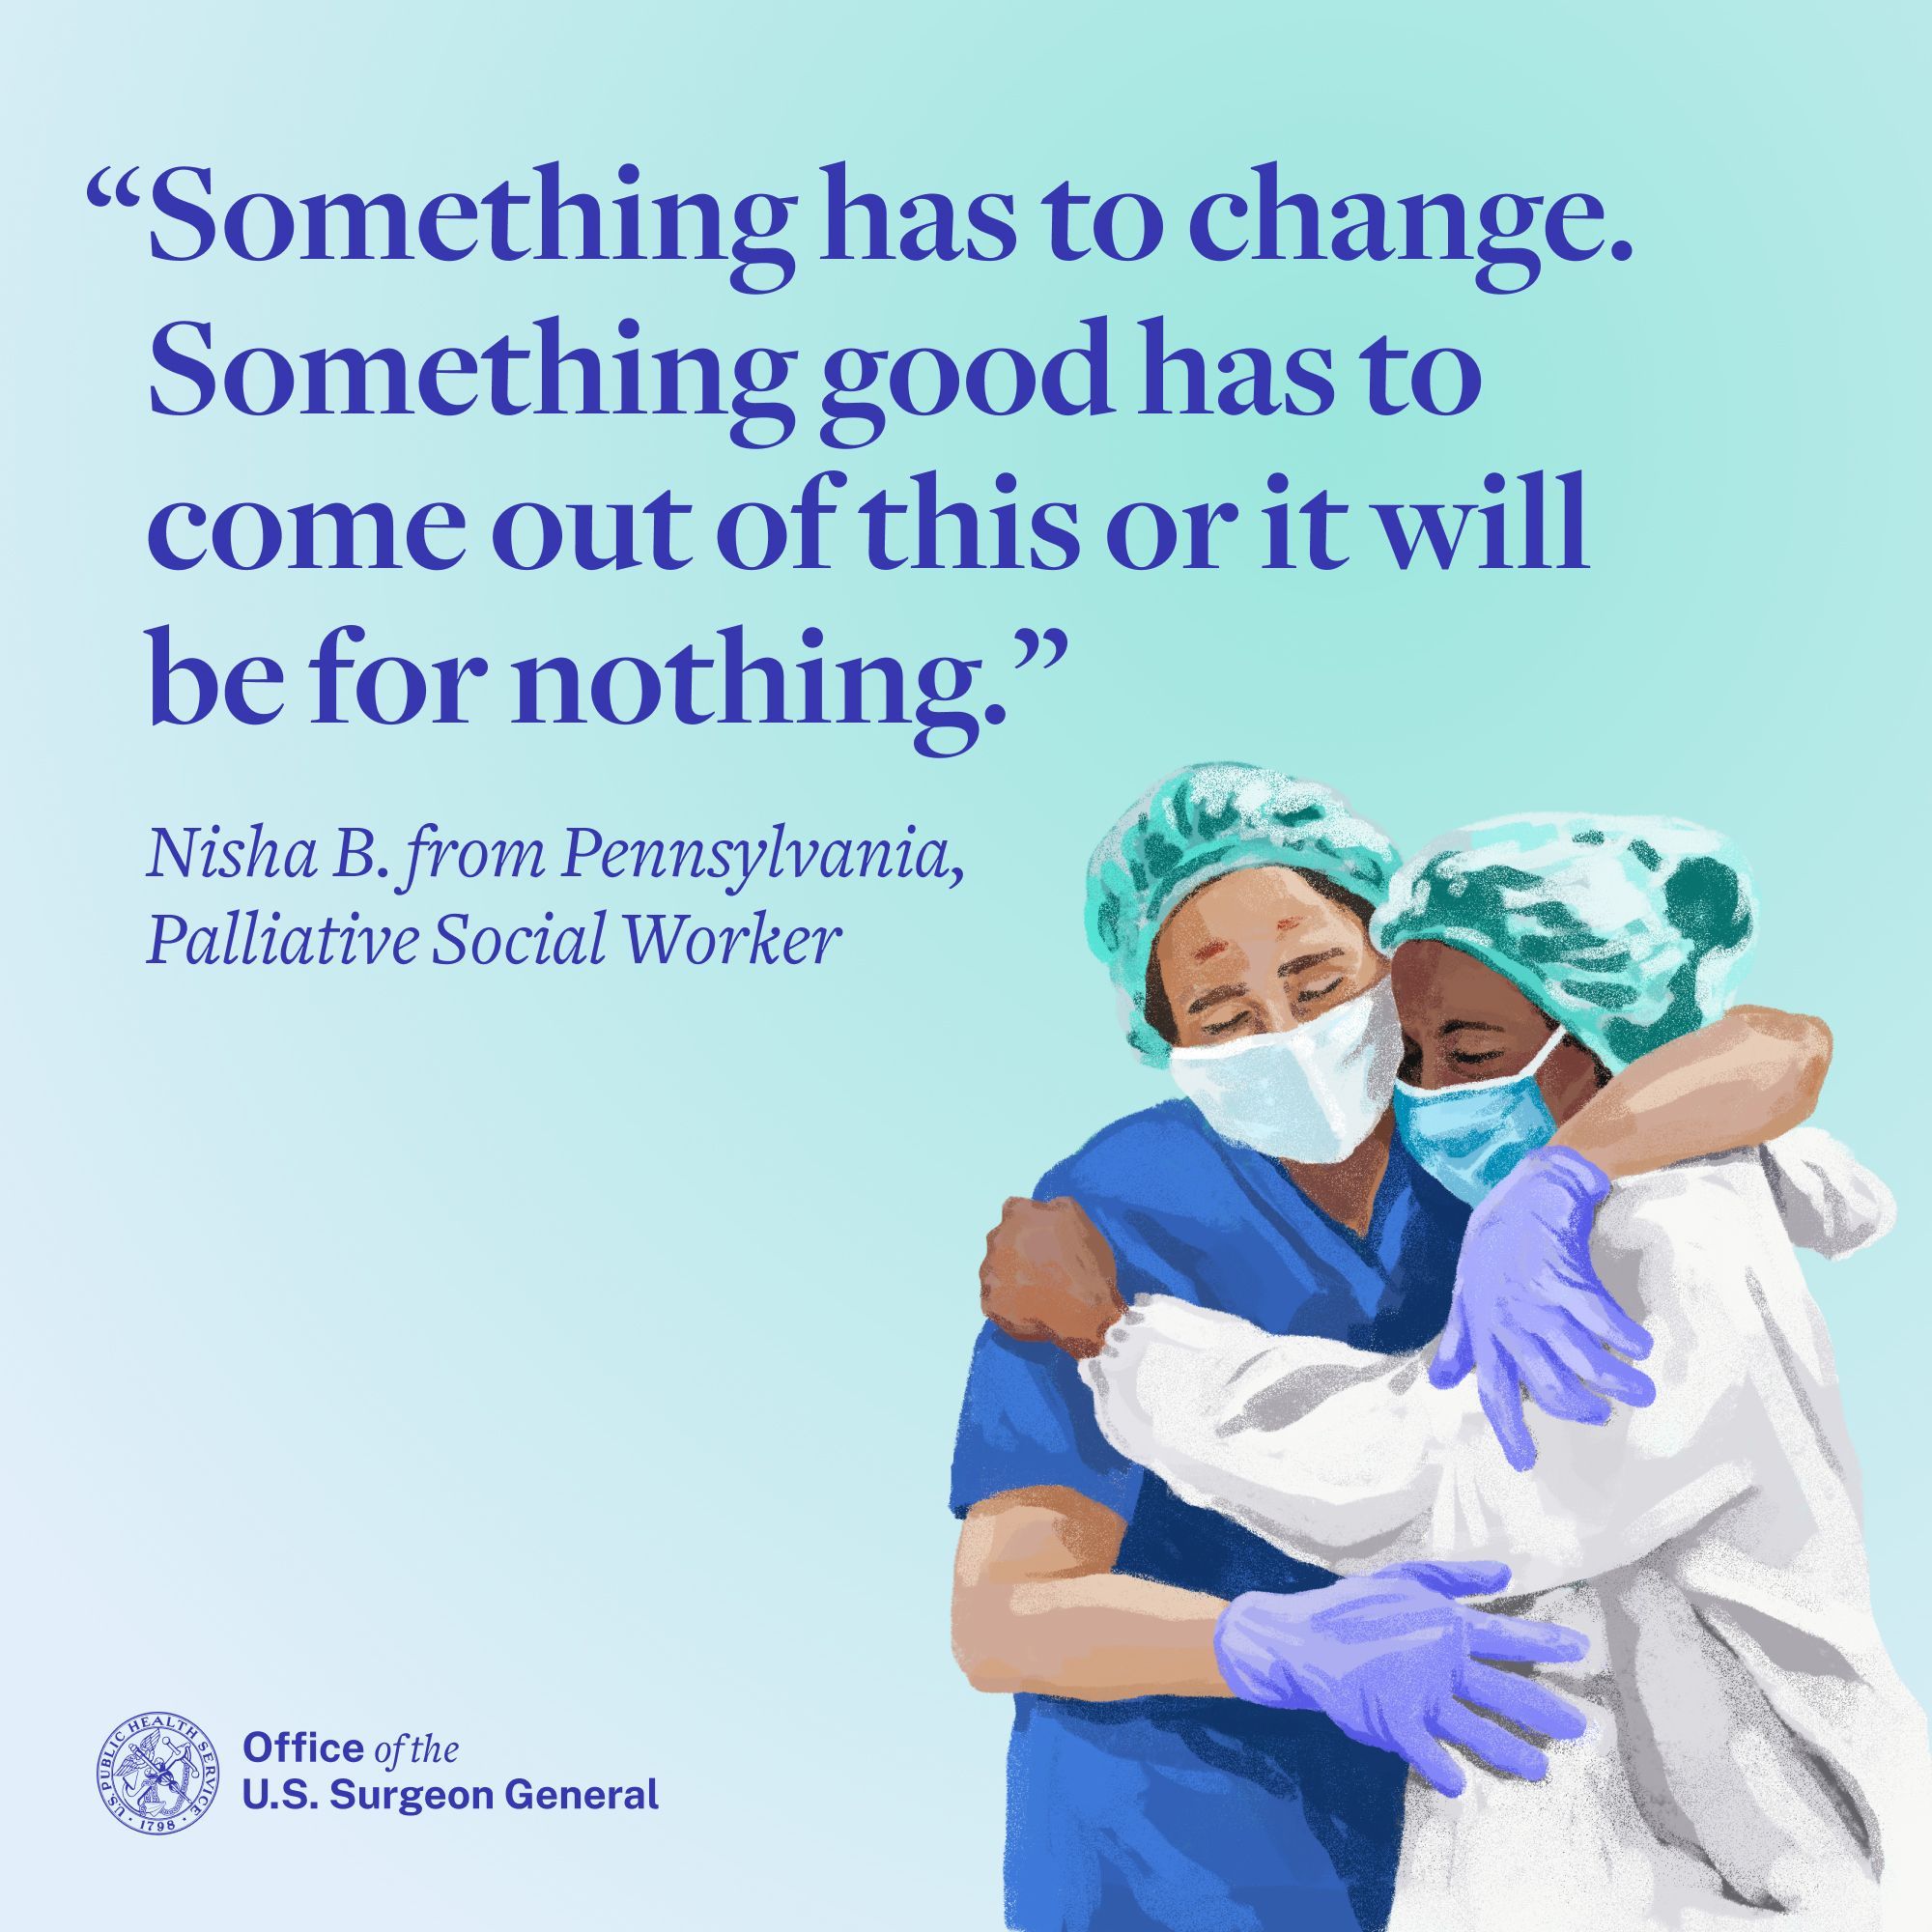 "Something has to change. Something good has to come out of this or it will be for nothing." Nisha B. from Pennsylvania, Palliative Social Worker